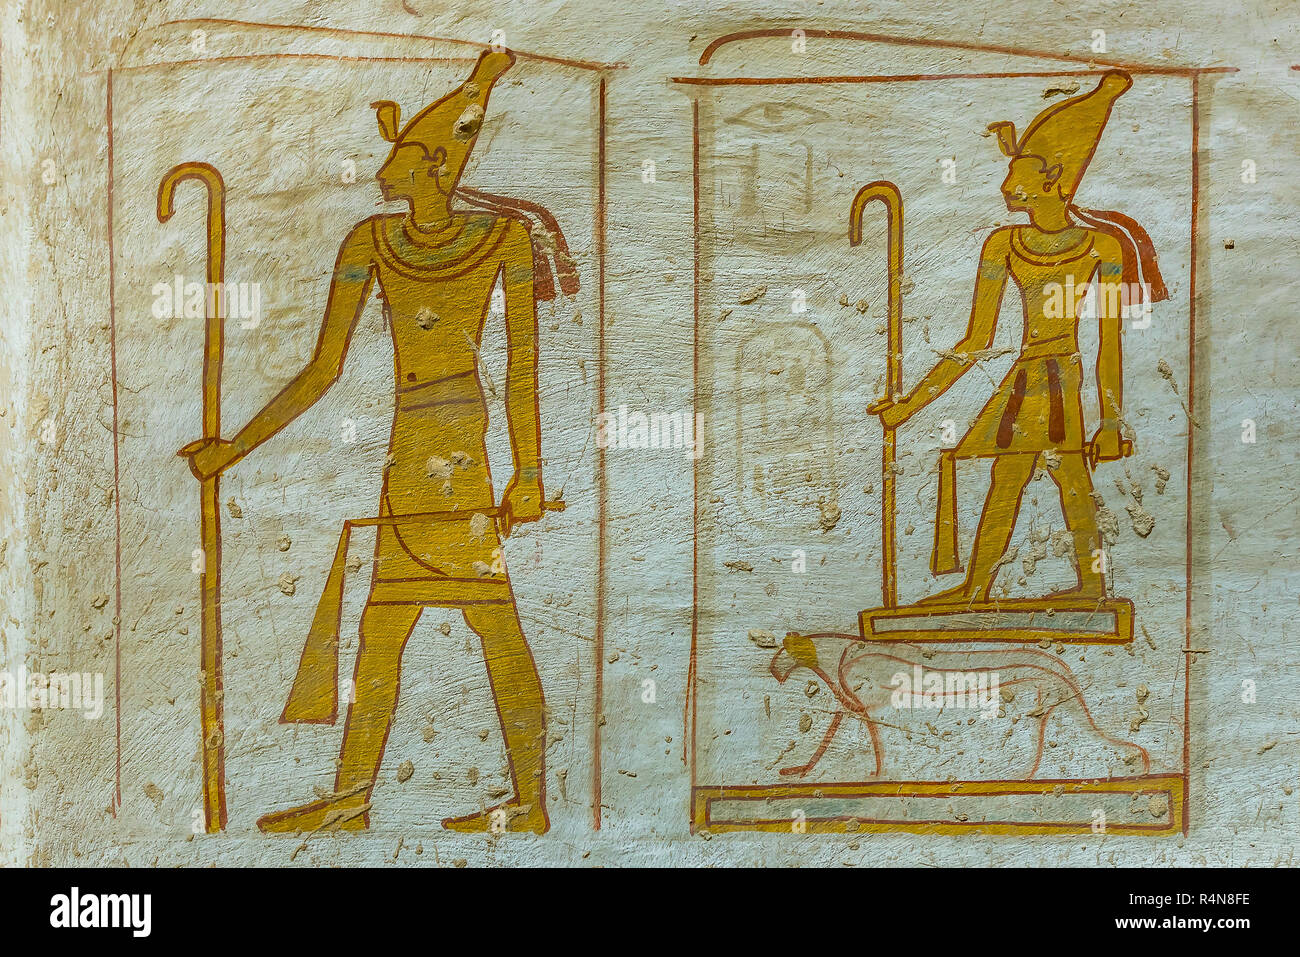 Wallpainting of the egyptian god Osiris in the valley of the kings, KV 14 tomb of Seti II, Luxor, Egypt, October 21, 2018 Stock Photo